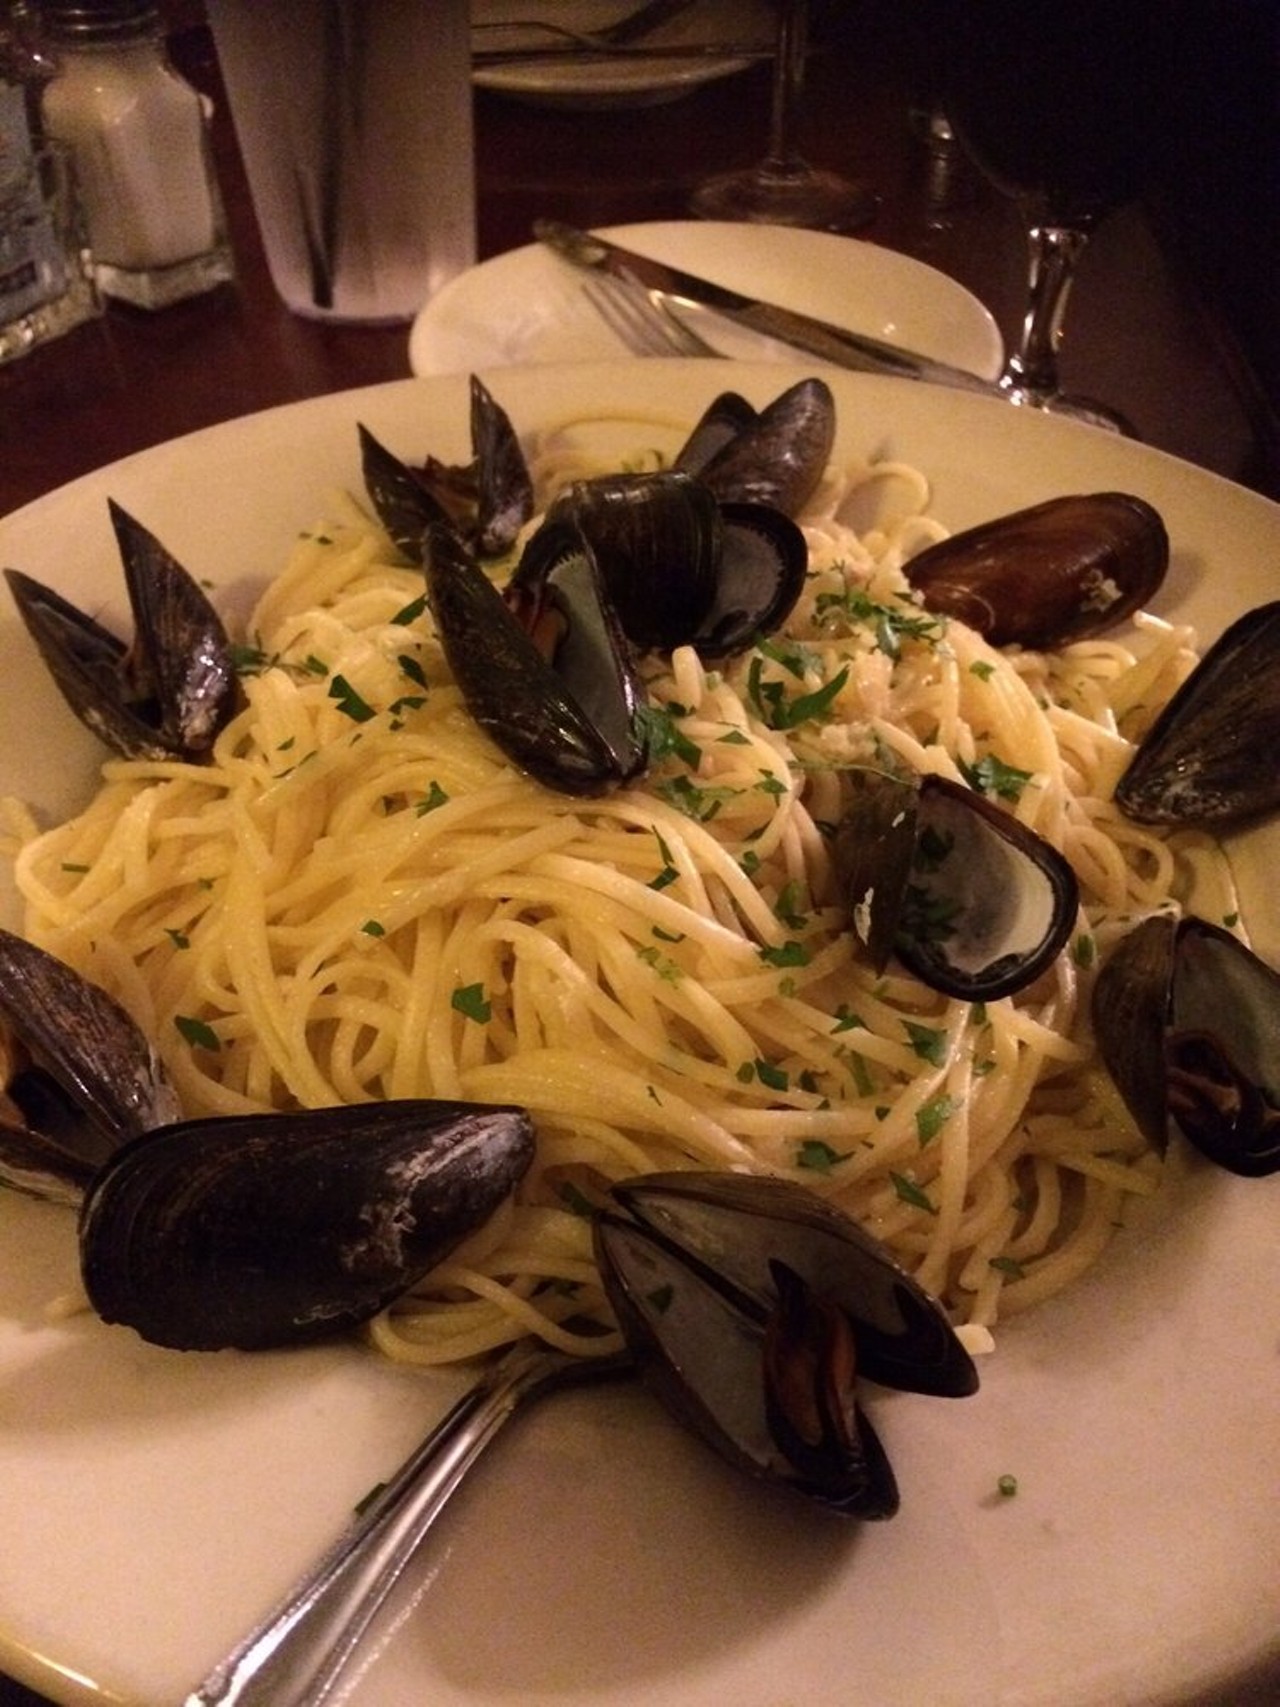 Linguine Aglia Oglio with Mussels | Trattoria Roman Gardens | 12207 Mayfield Rd
Cleveland, OH 44106